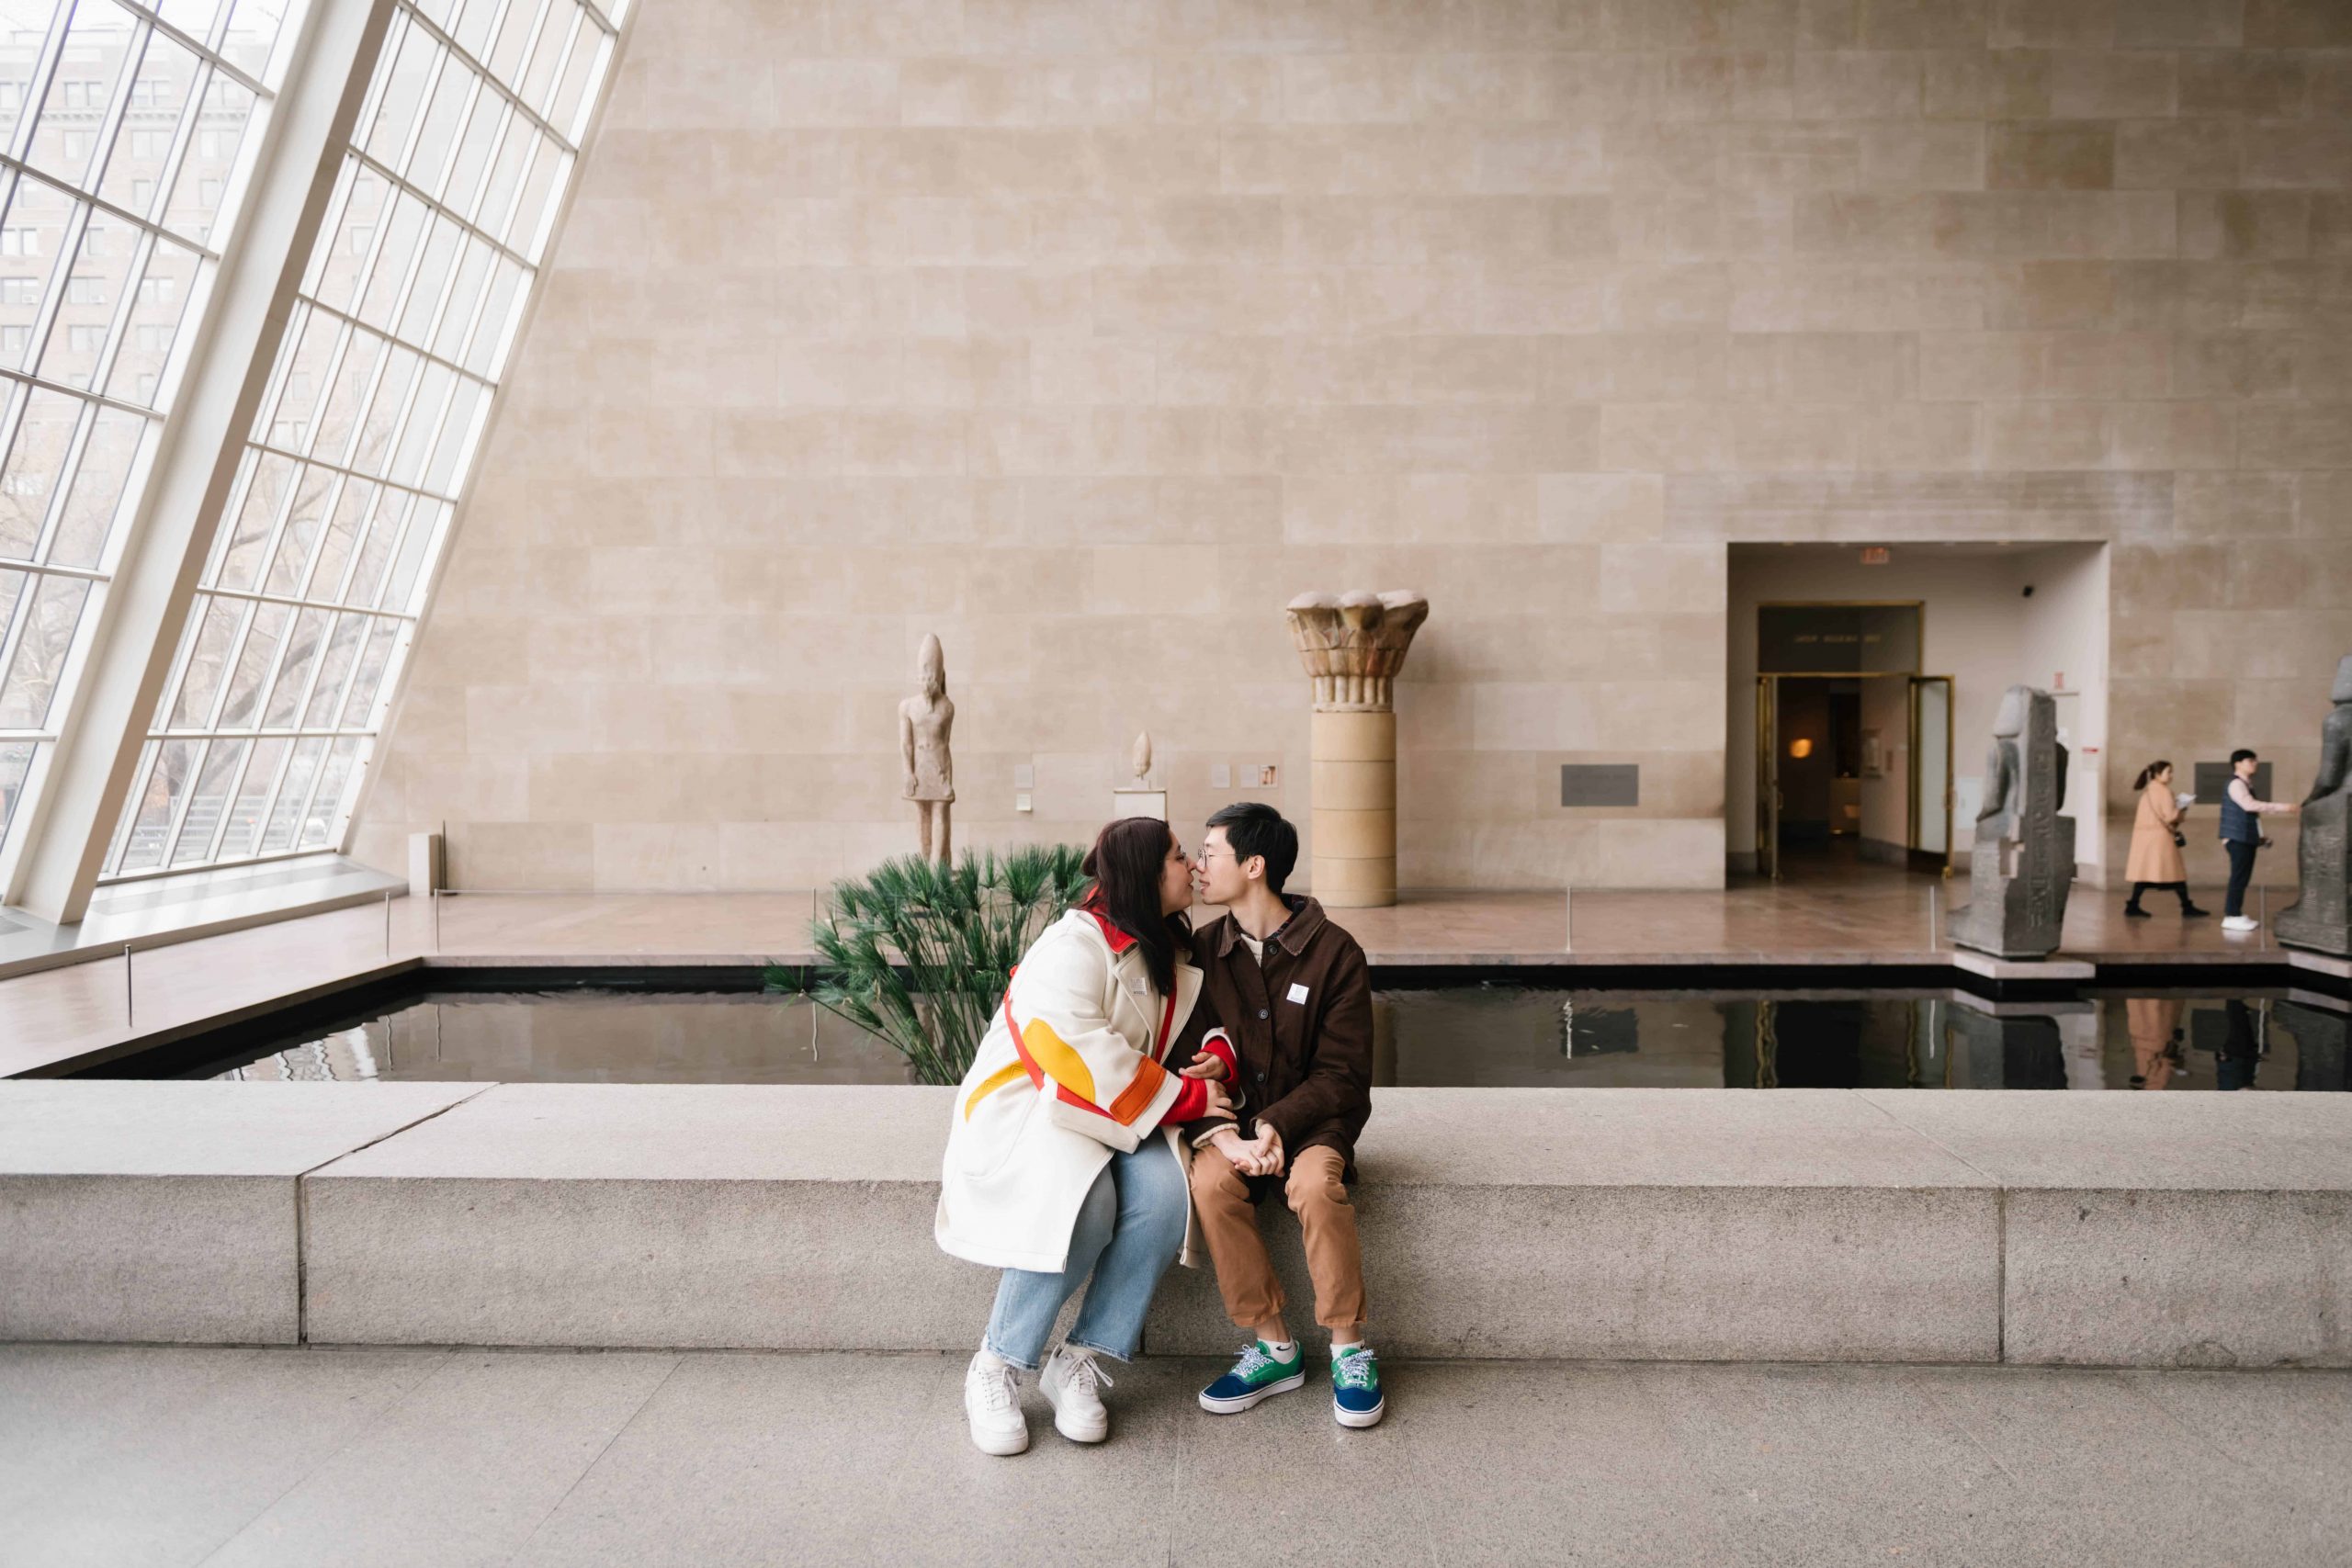 The Met: one of the best places in New York to propose